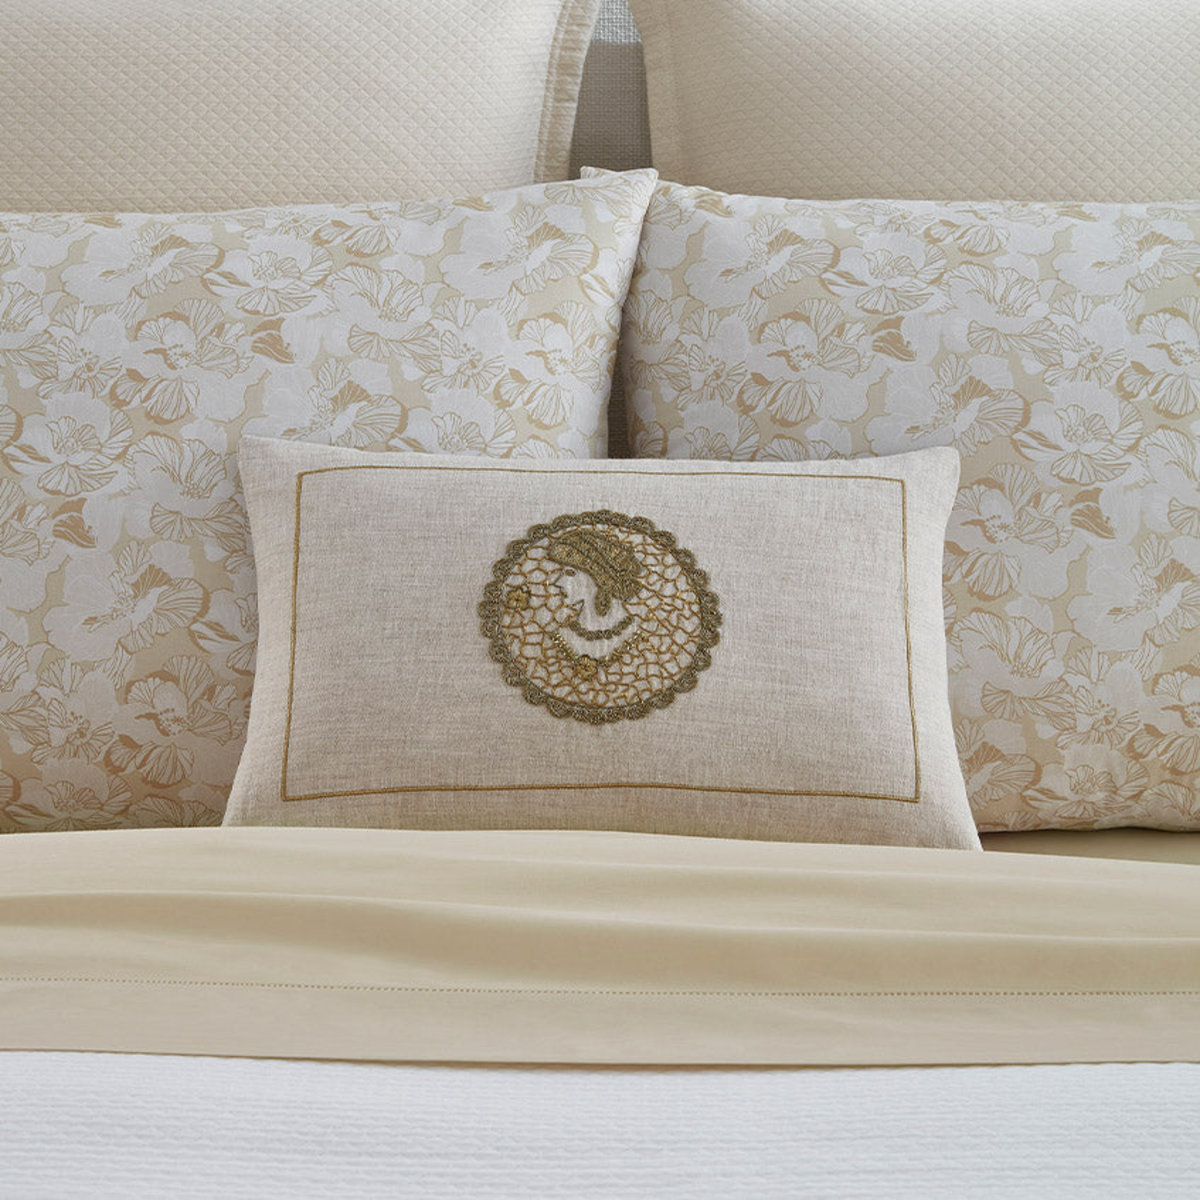 Sferra Cameo Decorative Pillow in Natural/Gold Color with Coordinate